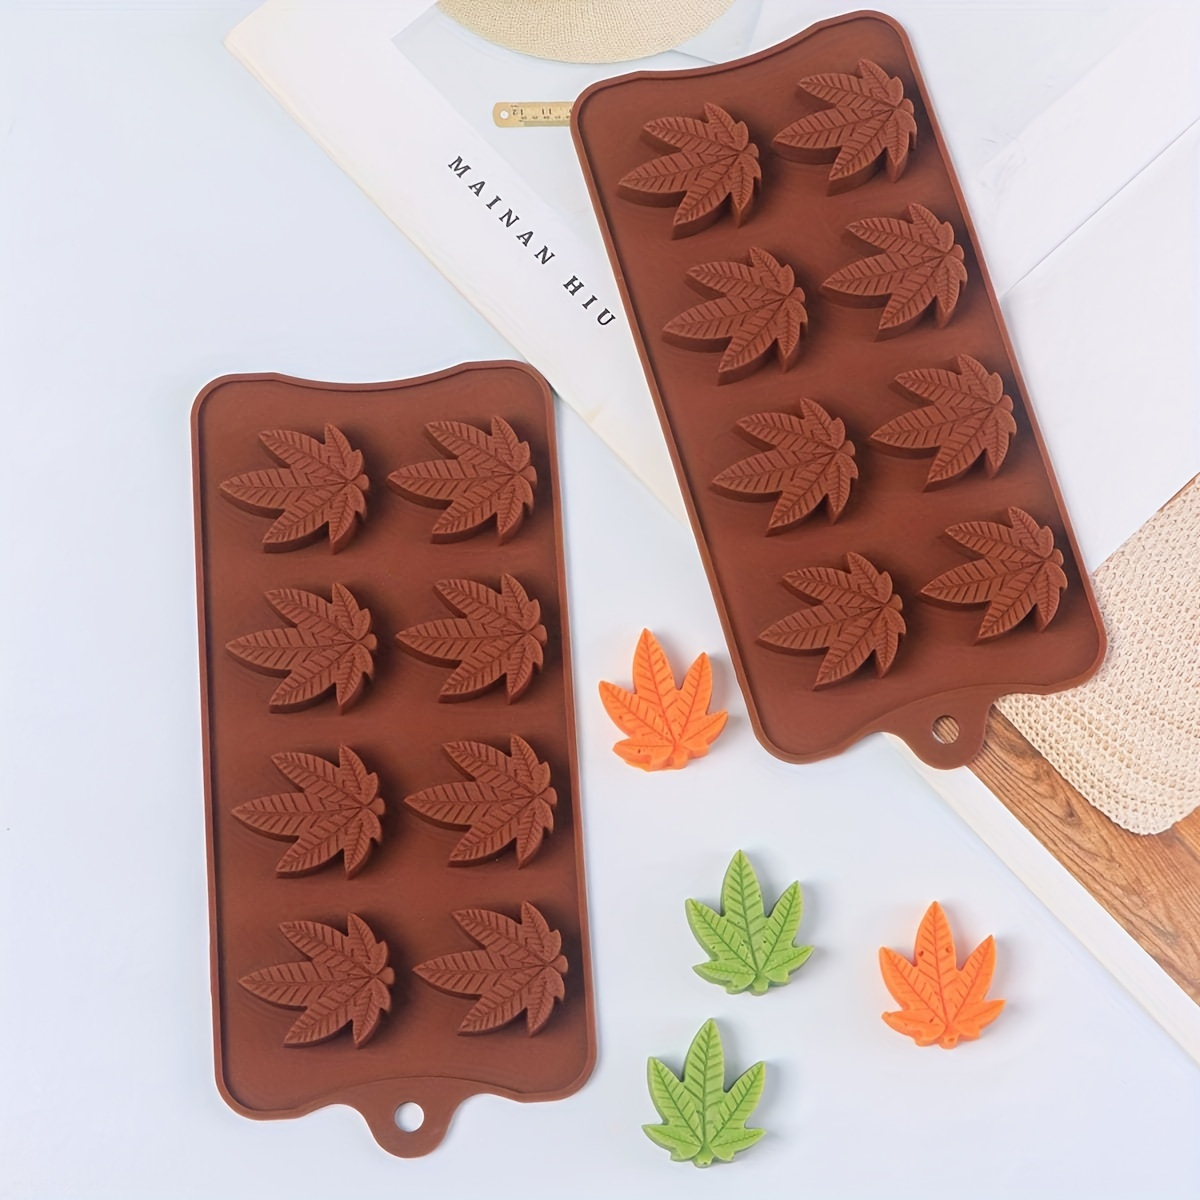 DIY Maple Leaf Silicone Mold Silicone Candy Chocolate Mold Fondant Cake  Decorating Tools Ice Cube Tray - Silicone Molds Wholesale & Retail -  Fondant, Soap, Candy, DIY Cake Molds